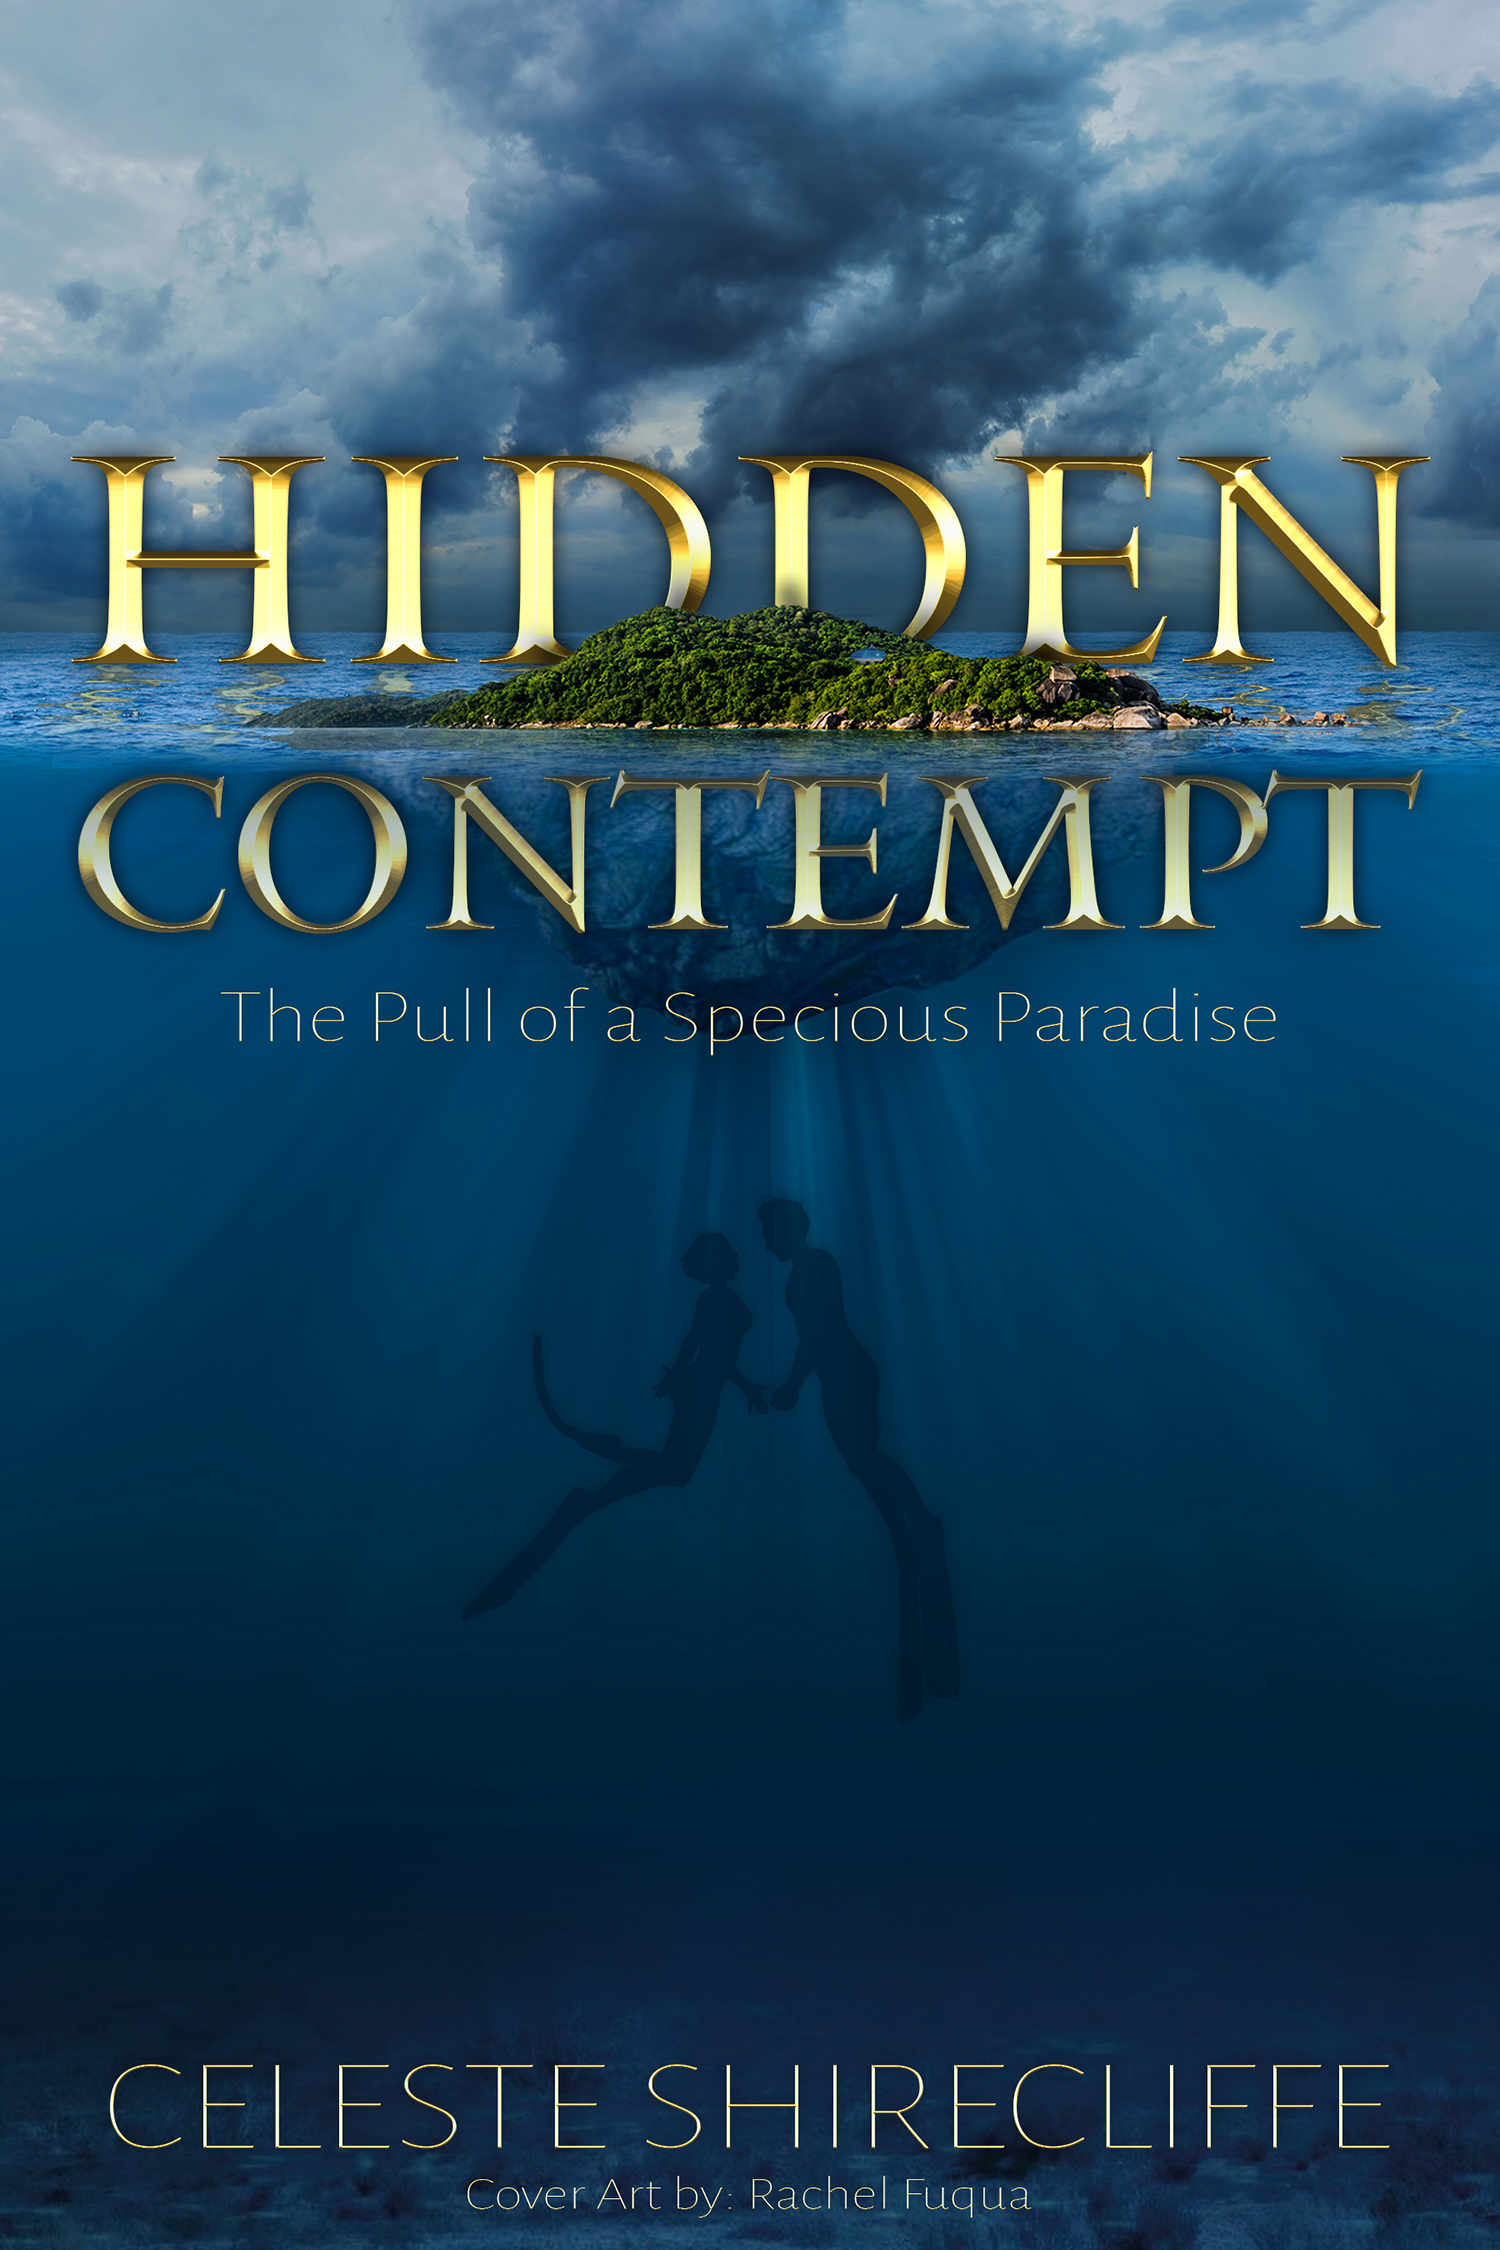 An island is surrounded by water and an overcast sky. Beneath the waves are the silhouette of a man and woman swimming with flippers on. In large bold letters, the words HIDDEN CONTEMPT surround the island. Beneath the word contempt are the words THE PULL OF A SPECIOUS PARADISE. At the bottom of the cover is CELESTE SHIRECLIFFE with the words COVER ART BY: RACHEL FUQUA below that.